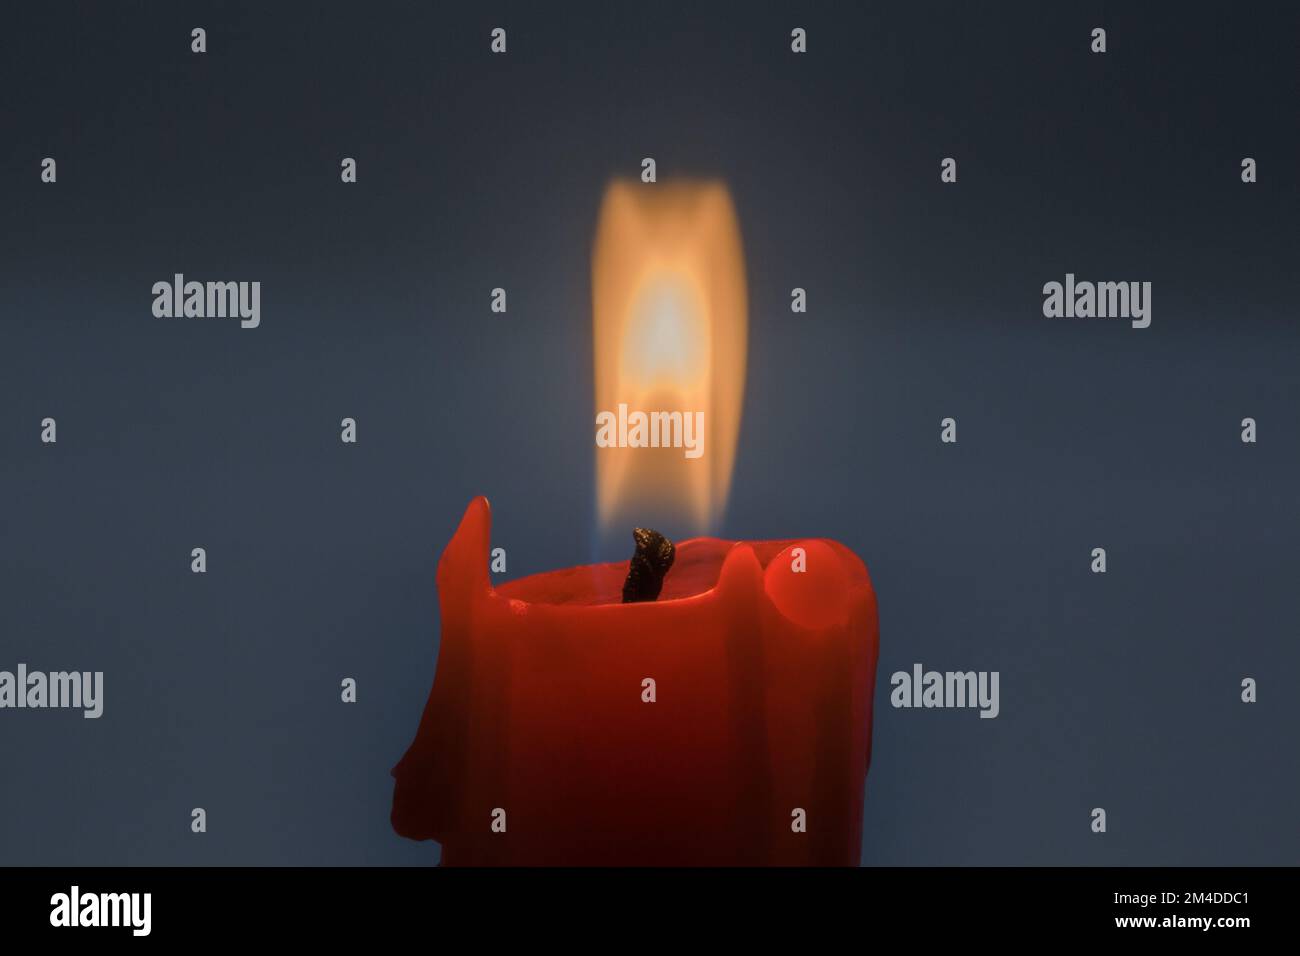 burning small red candle stub closeup on dark background Stock Photo